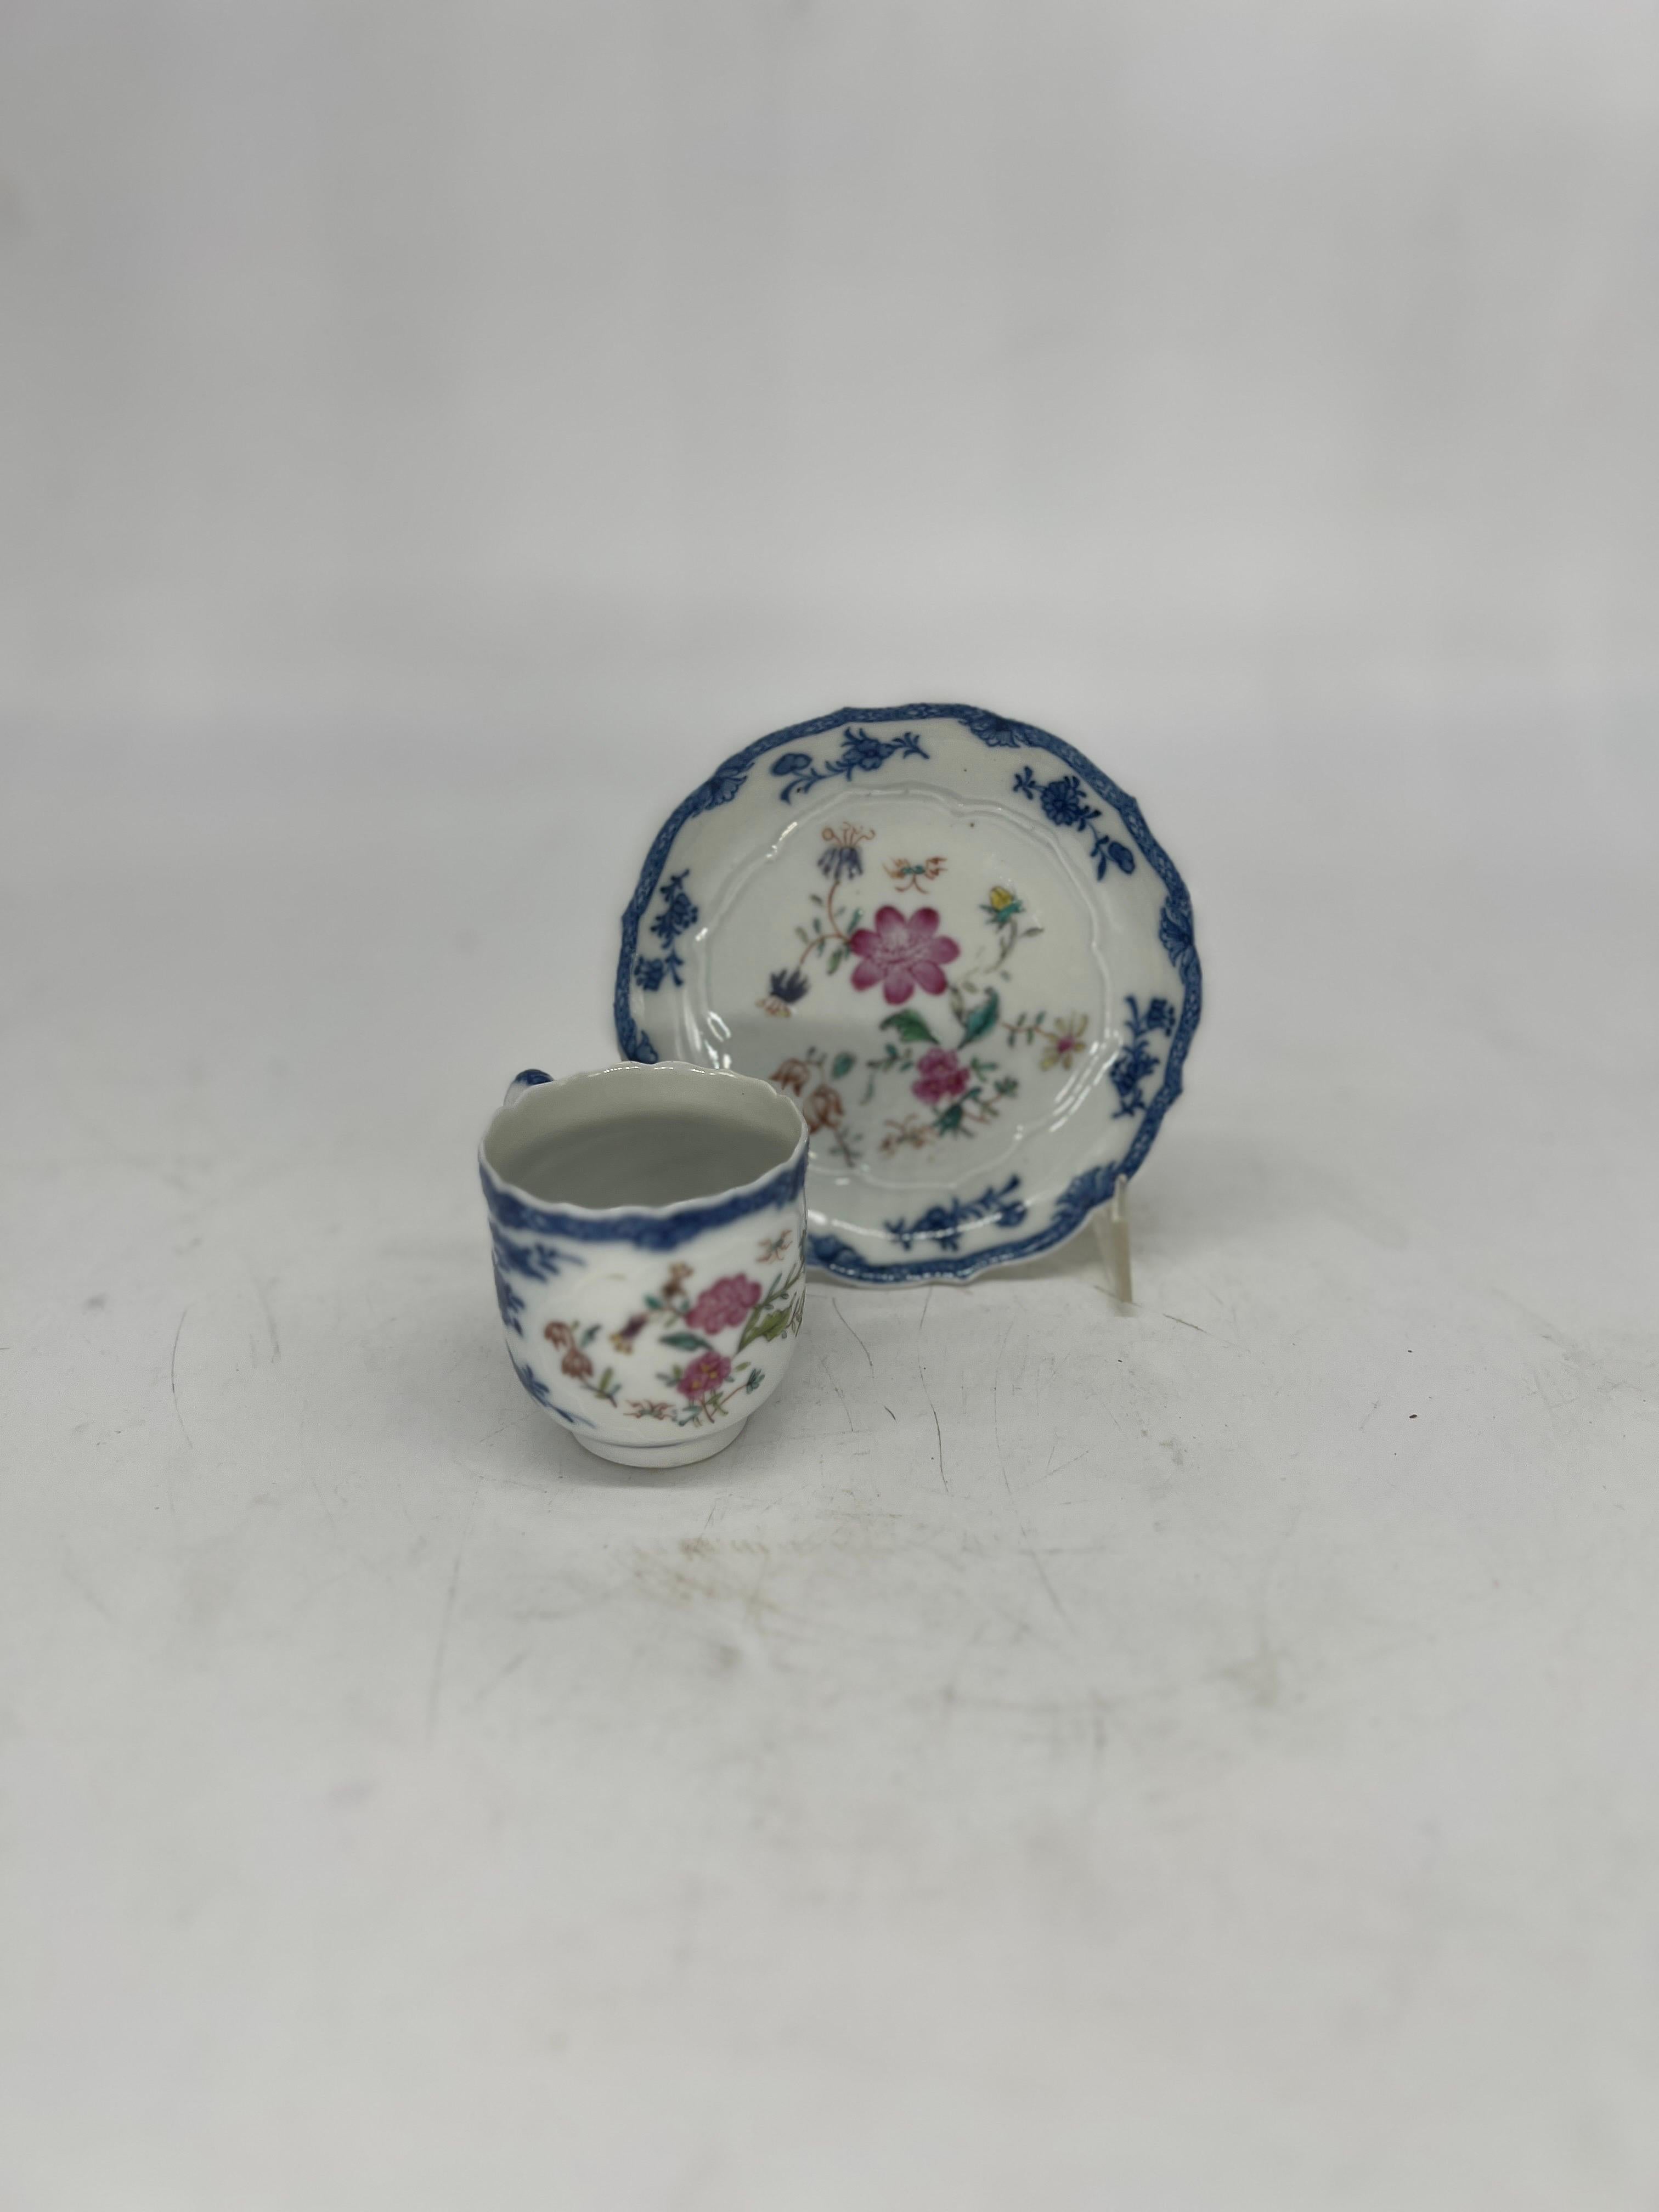 Chinese, circa 1785.

Chinese export porcelain cup and saucer set produced with blue and white underglaze foliate motifs and geometric designs to edges. The main face of the cup and saucer have polychrome enamel painted flowers and fine quality.